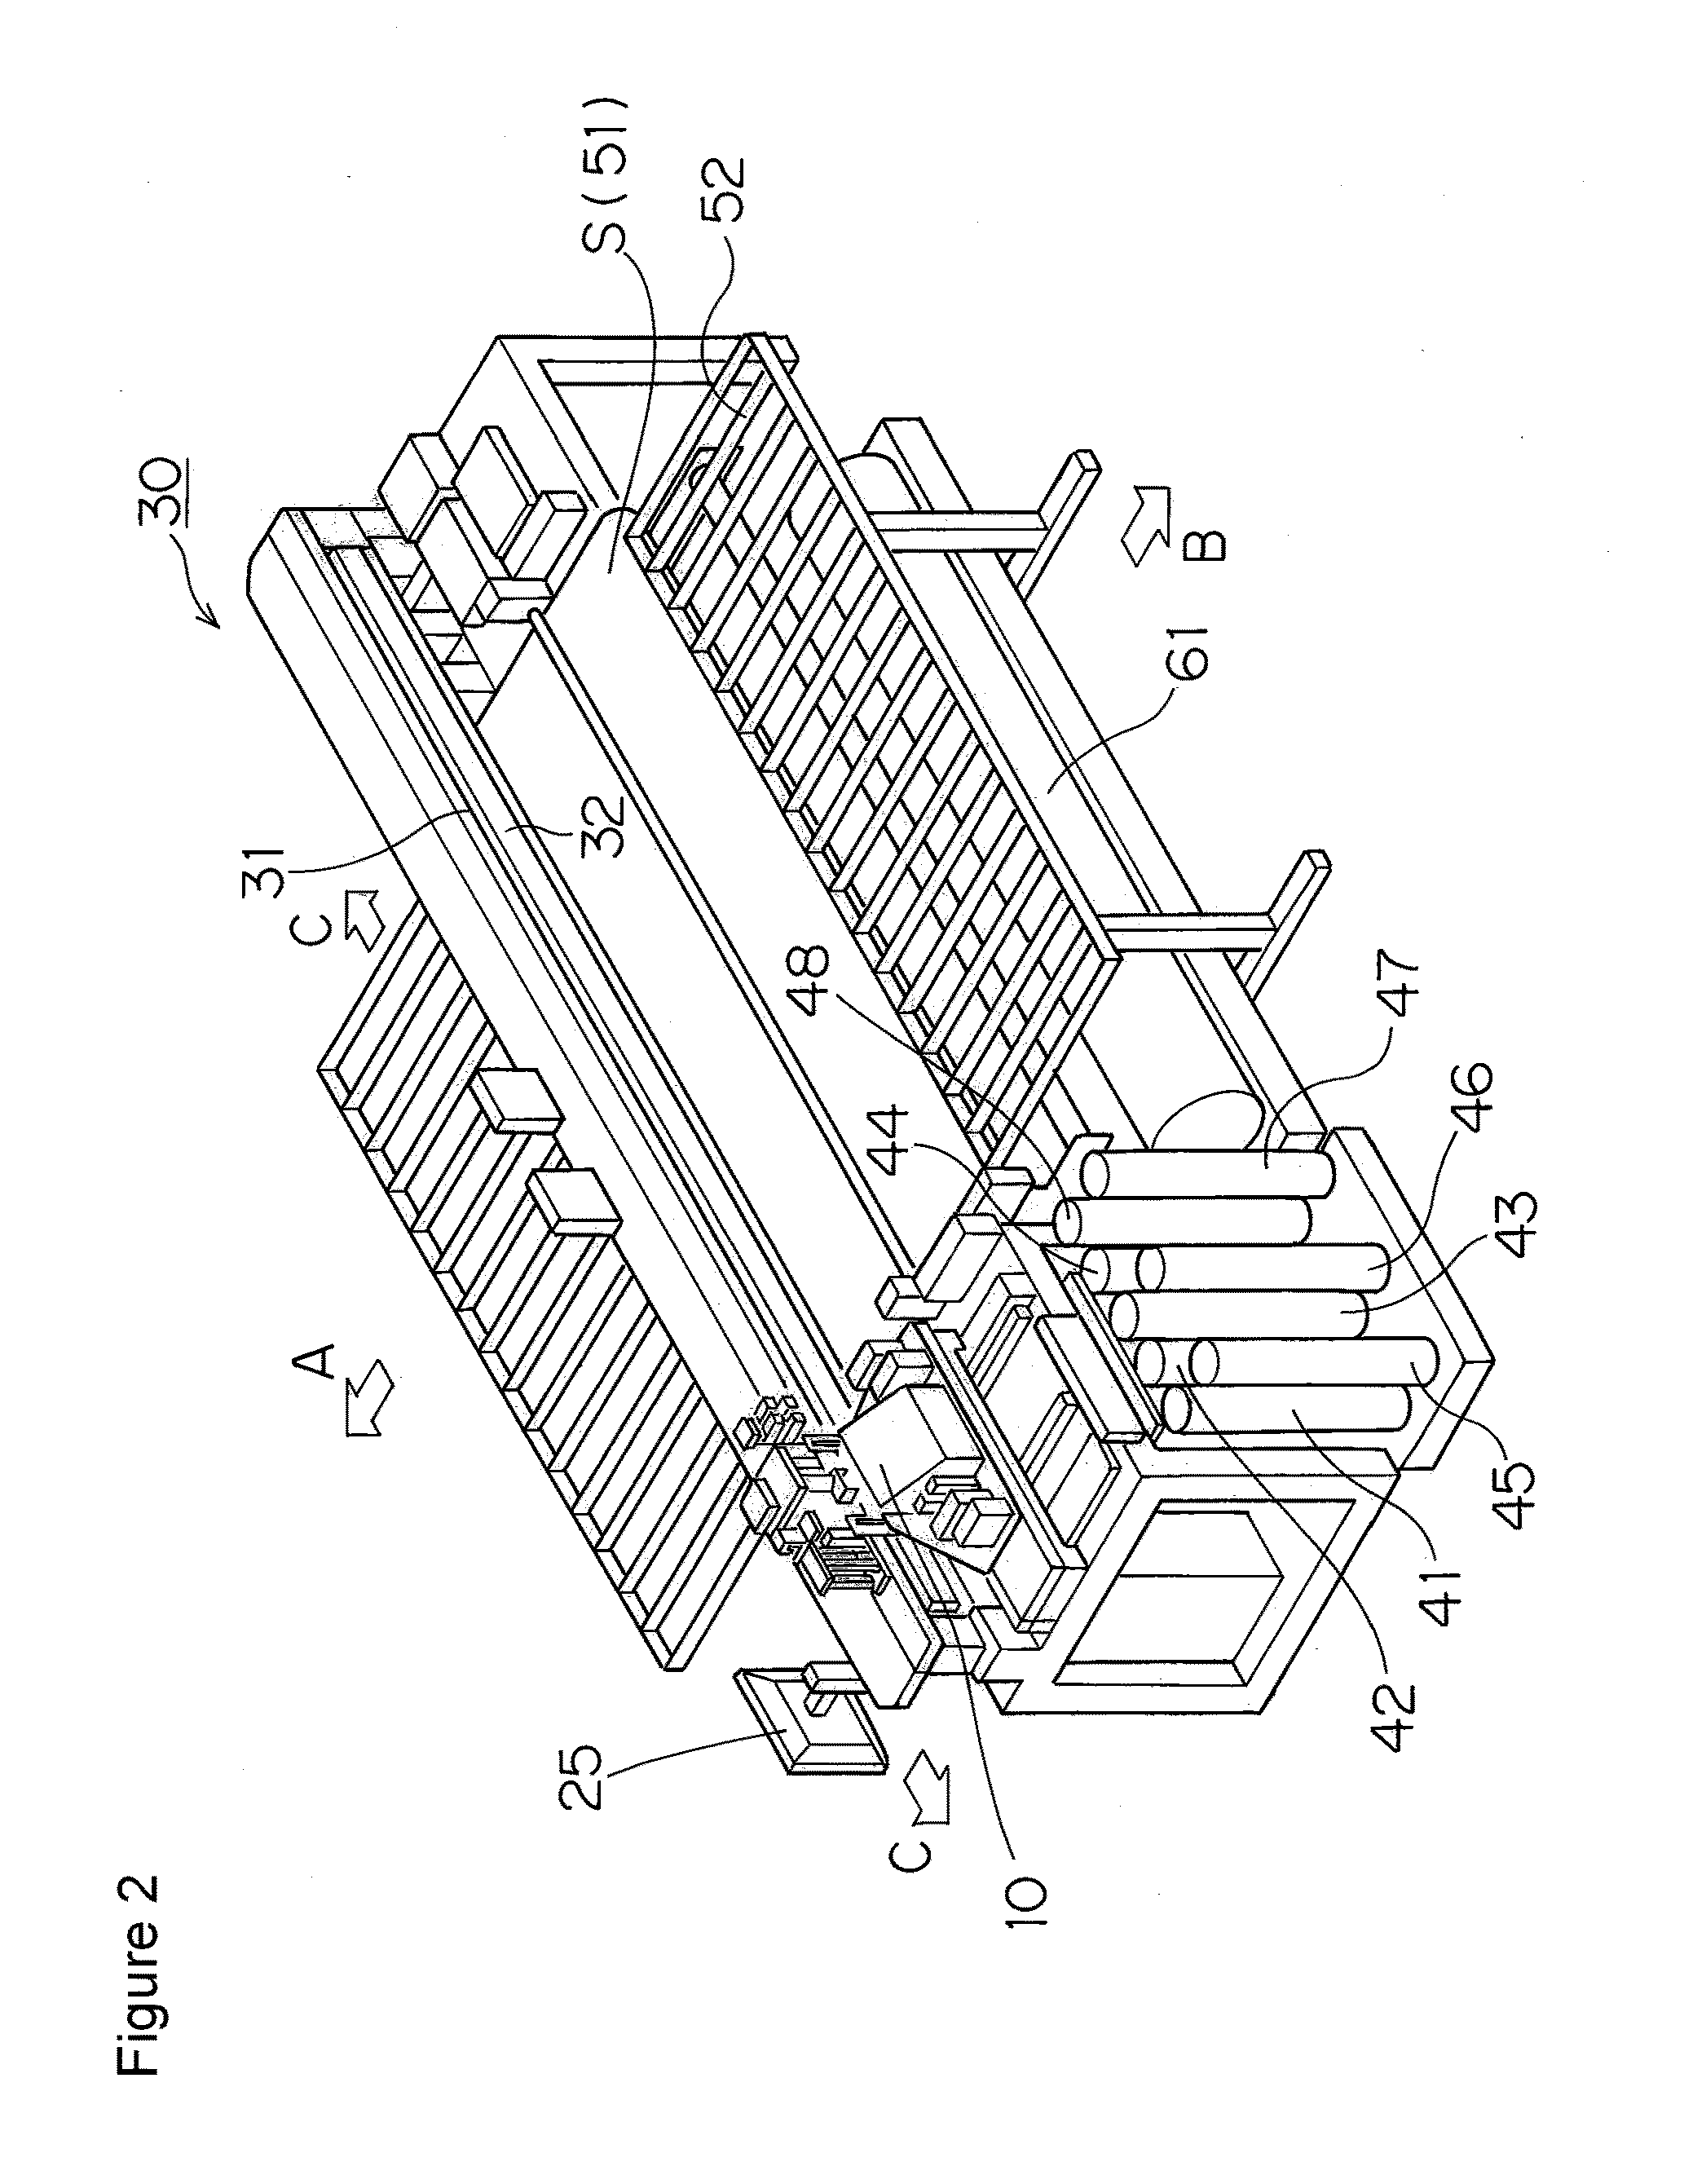 Inkjet image recorder and method for correction of belt conveyance